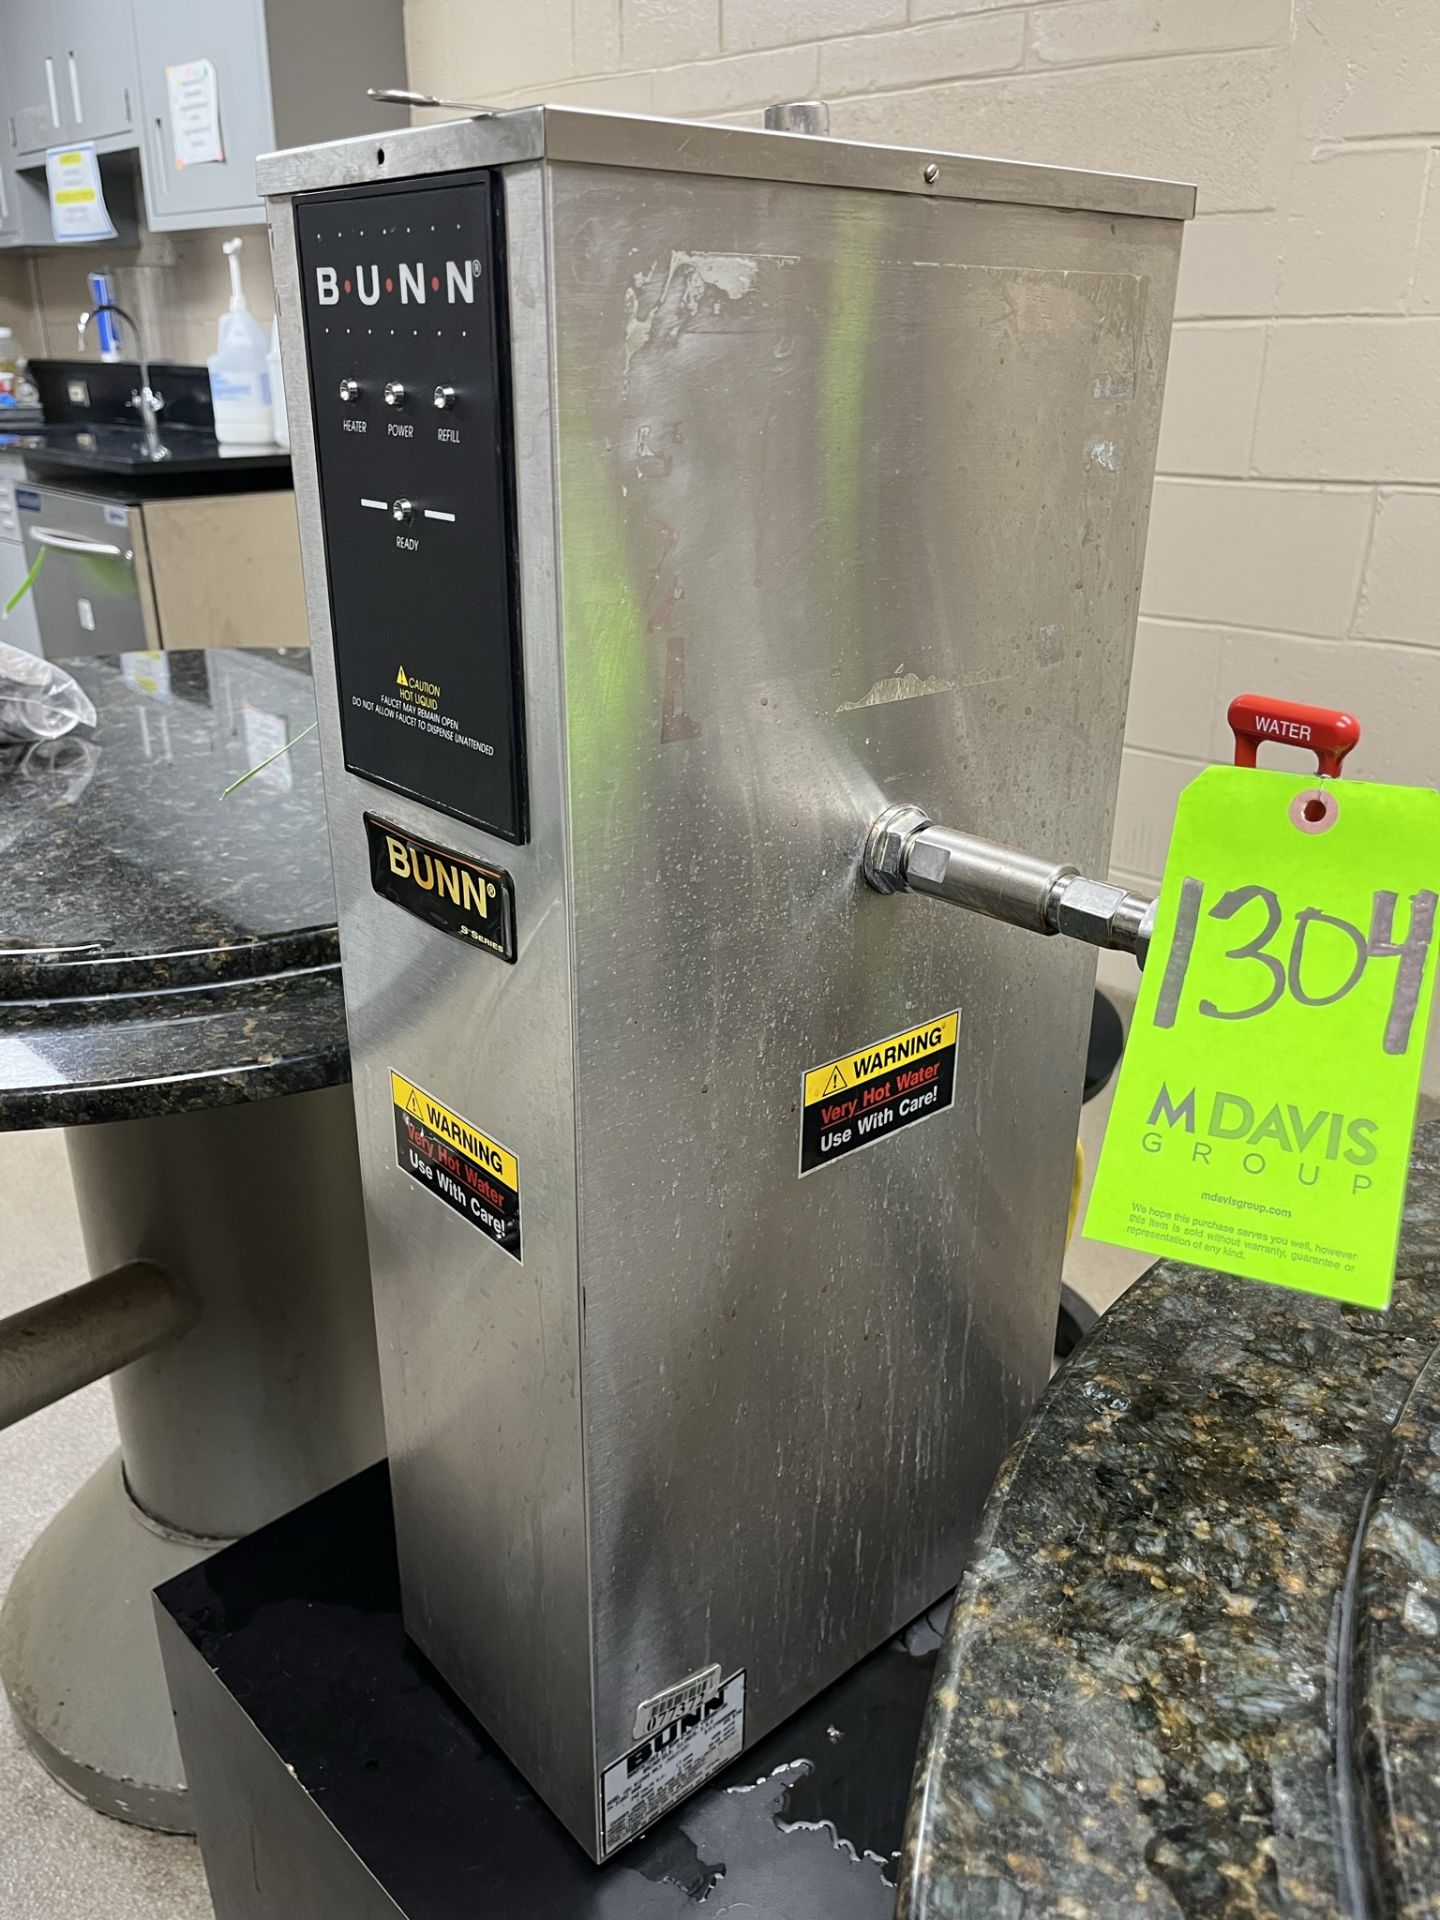 BUNN-H5X ELEMENT STAINLESS STEEL HOT WATER DISPENSER MODEL H5X #12500.0026 S/N EP00000006 P/N: - Image 5 of 6